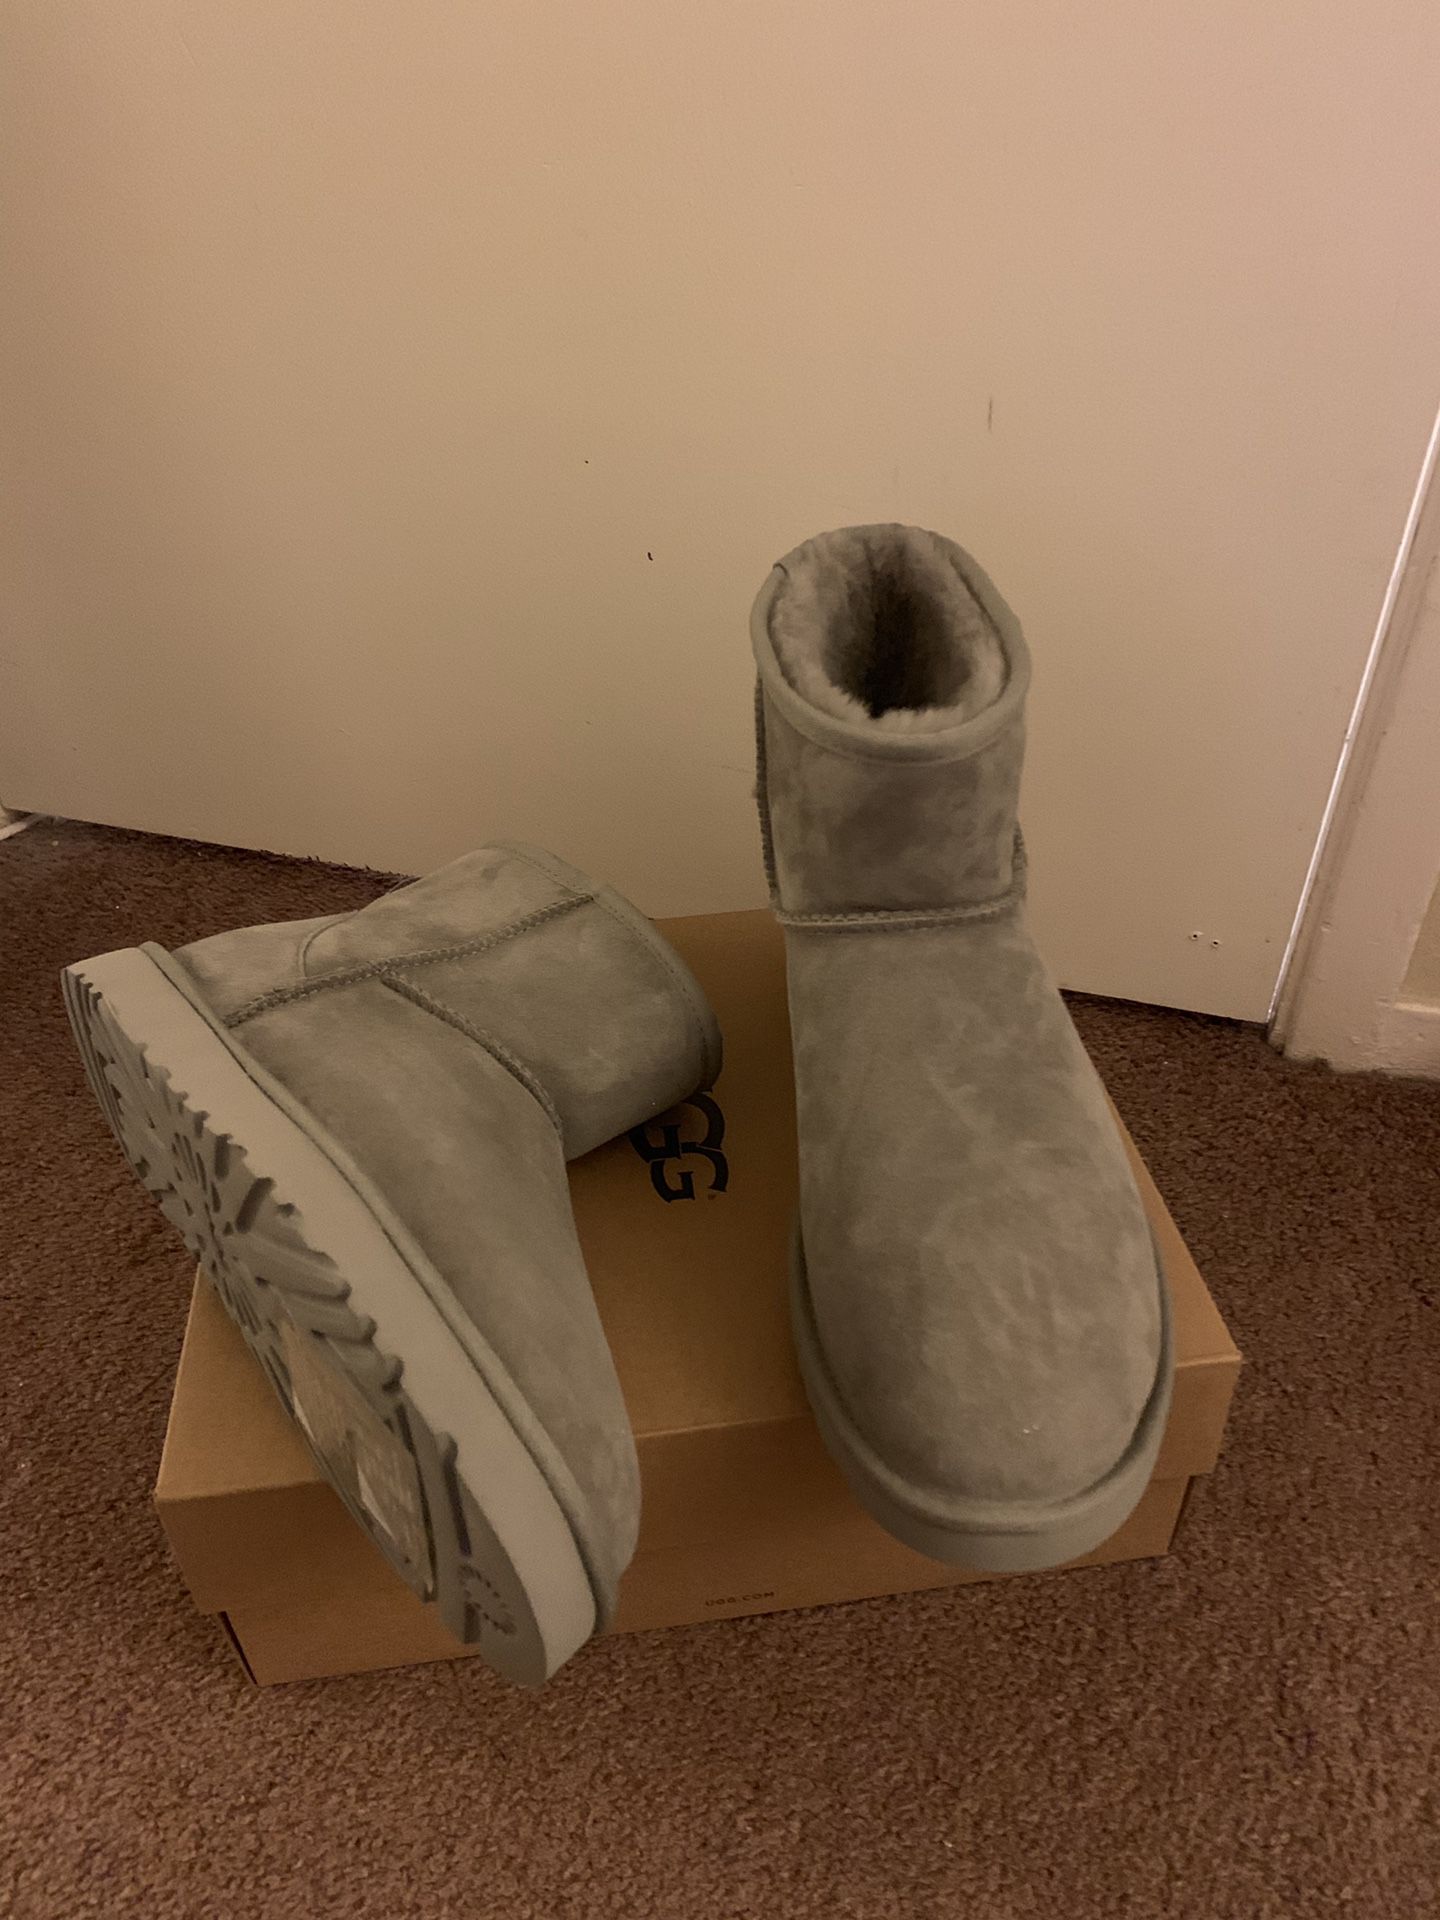 100% Authentic Brand New in Box UGG Classic Mini Boots / Men size 11, 13, 14 / Color Grey